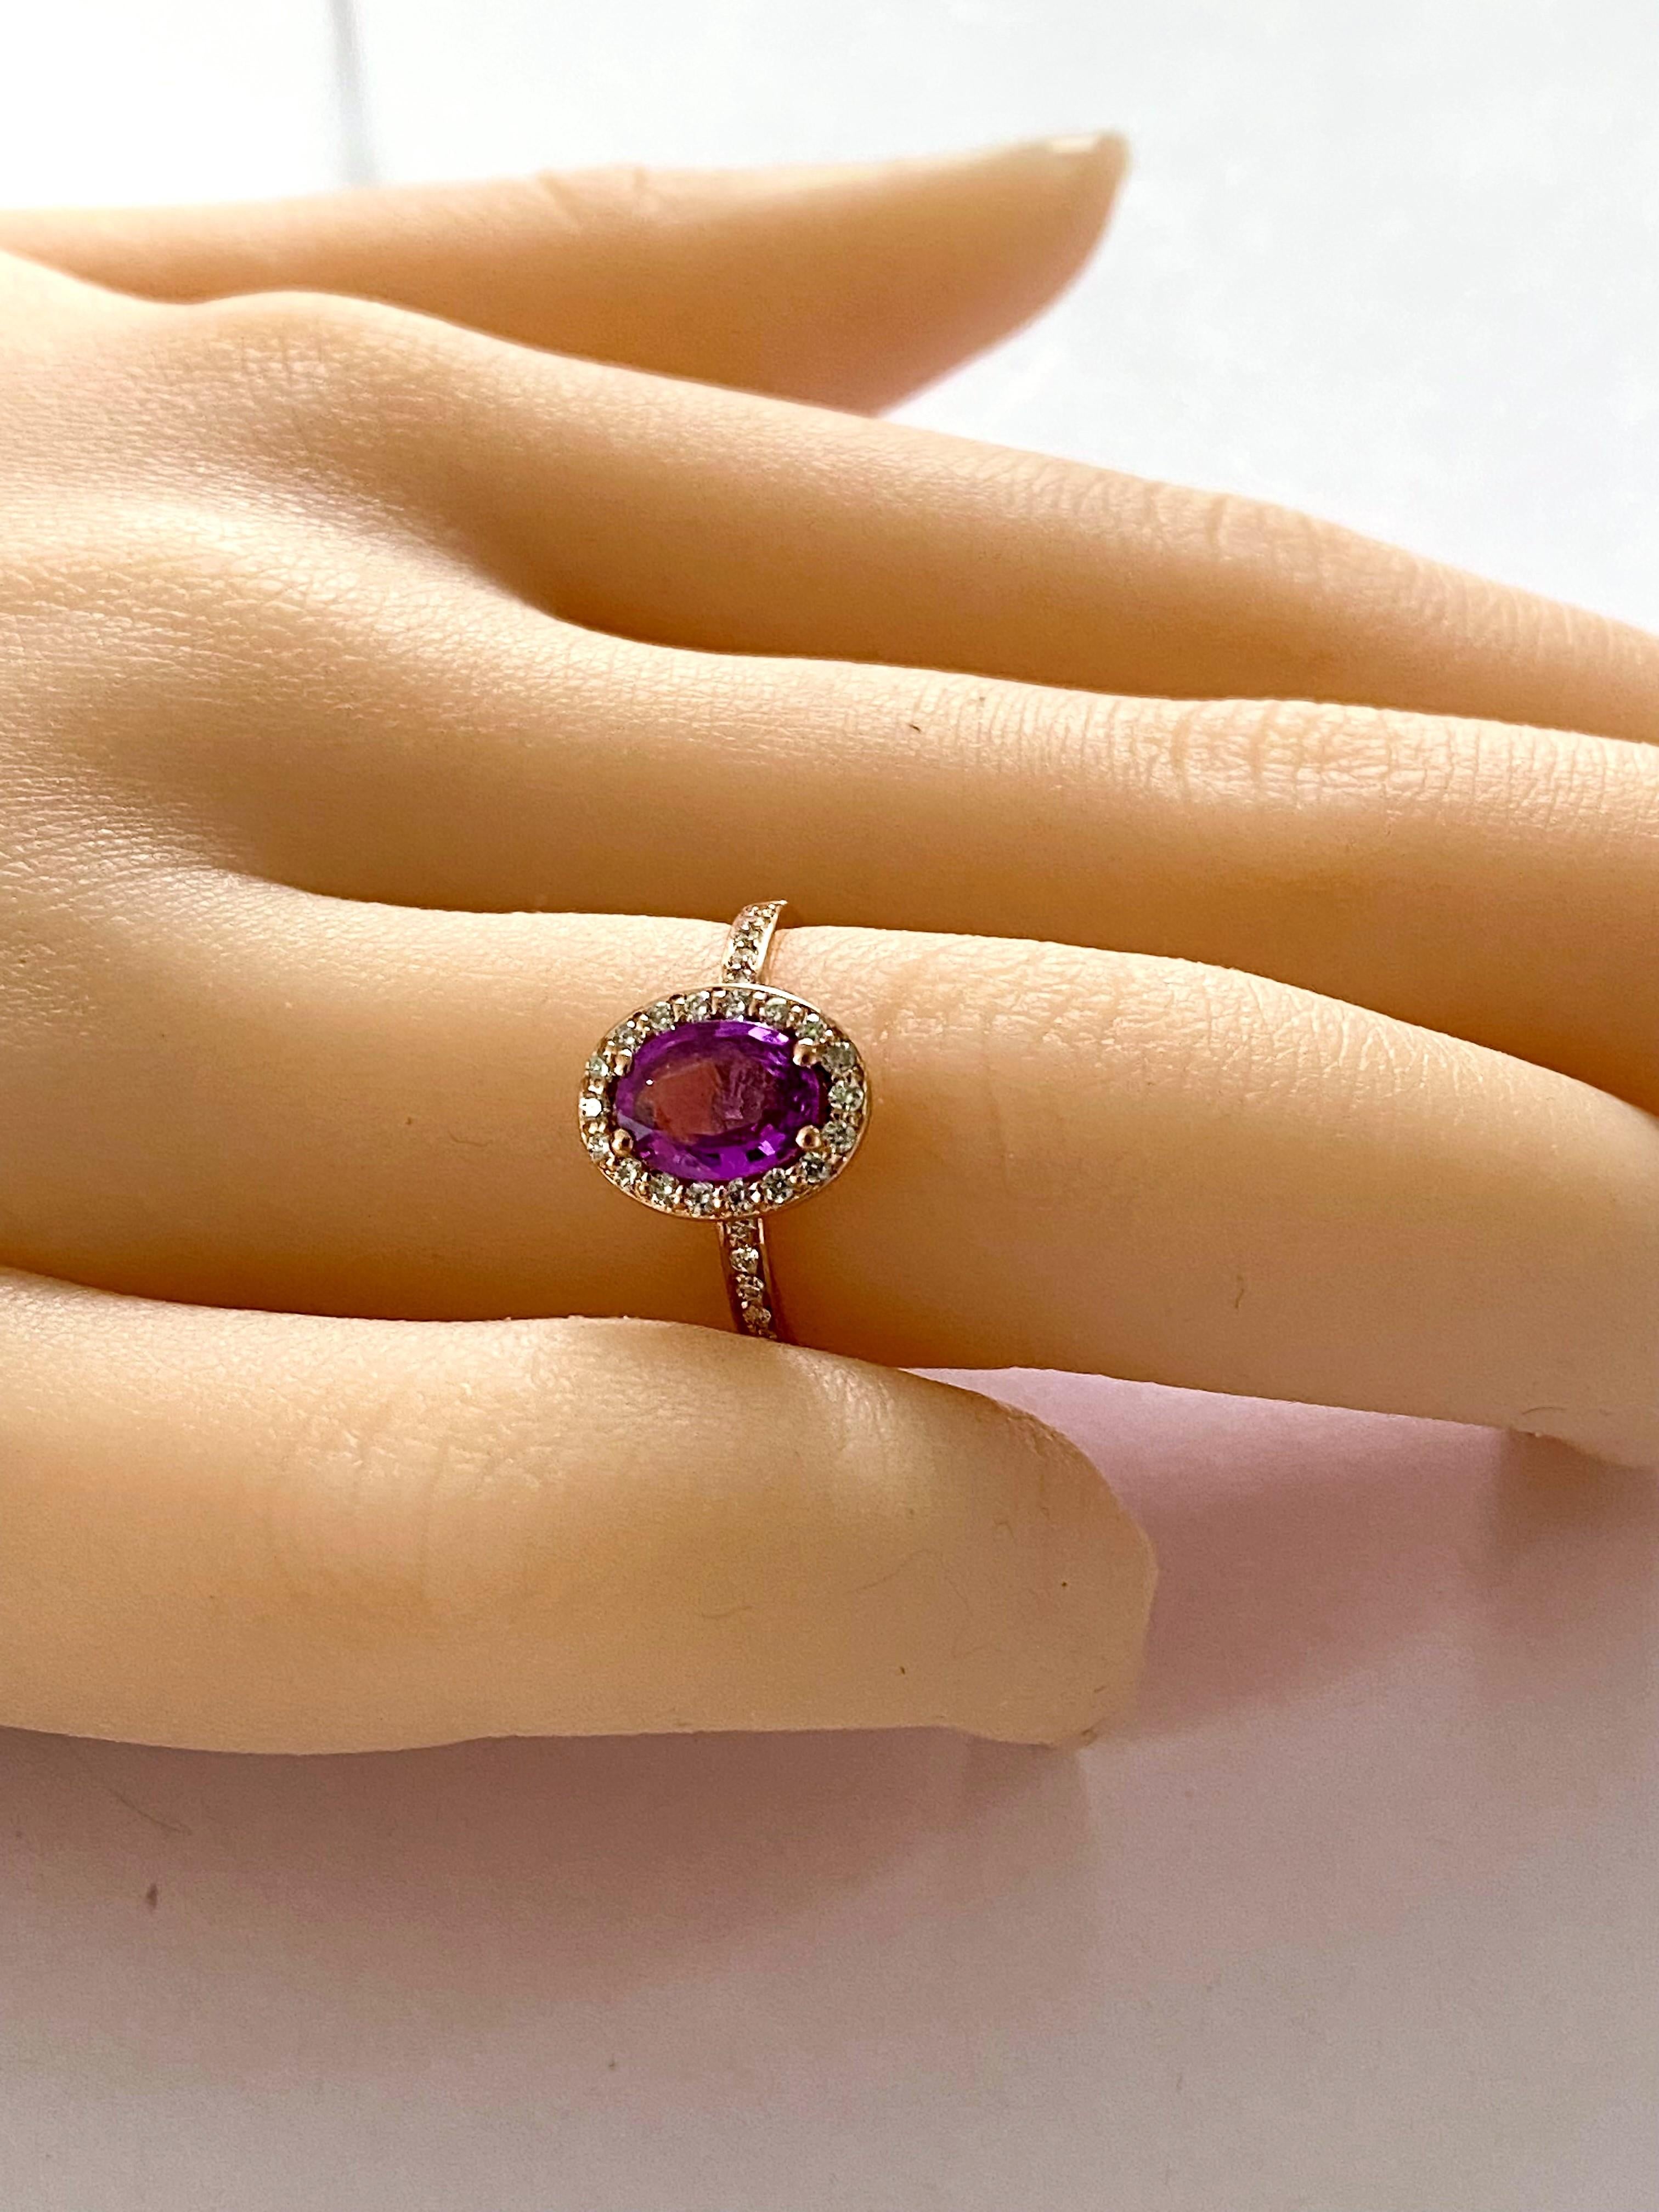 Oval Cut Oval Pink Sapphire and Diamond Rose Gold Cocktail Ring Weighing 1.75 Carat